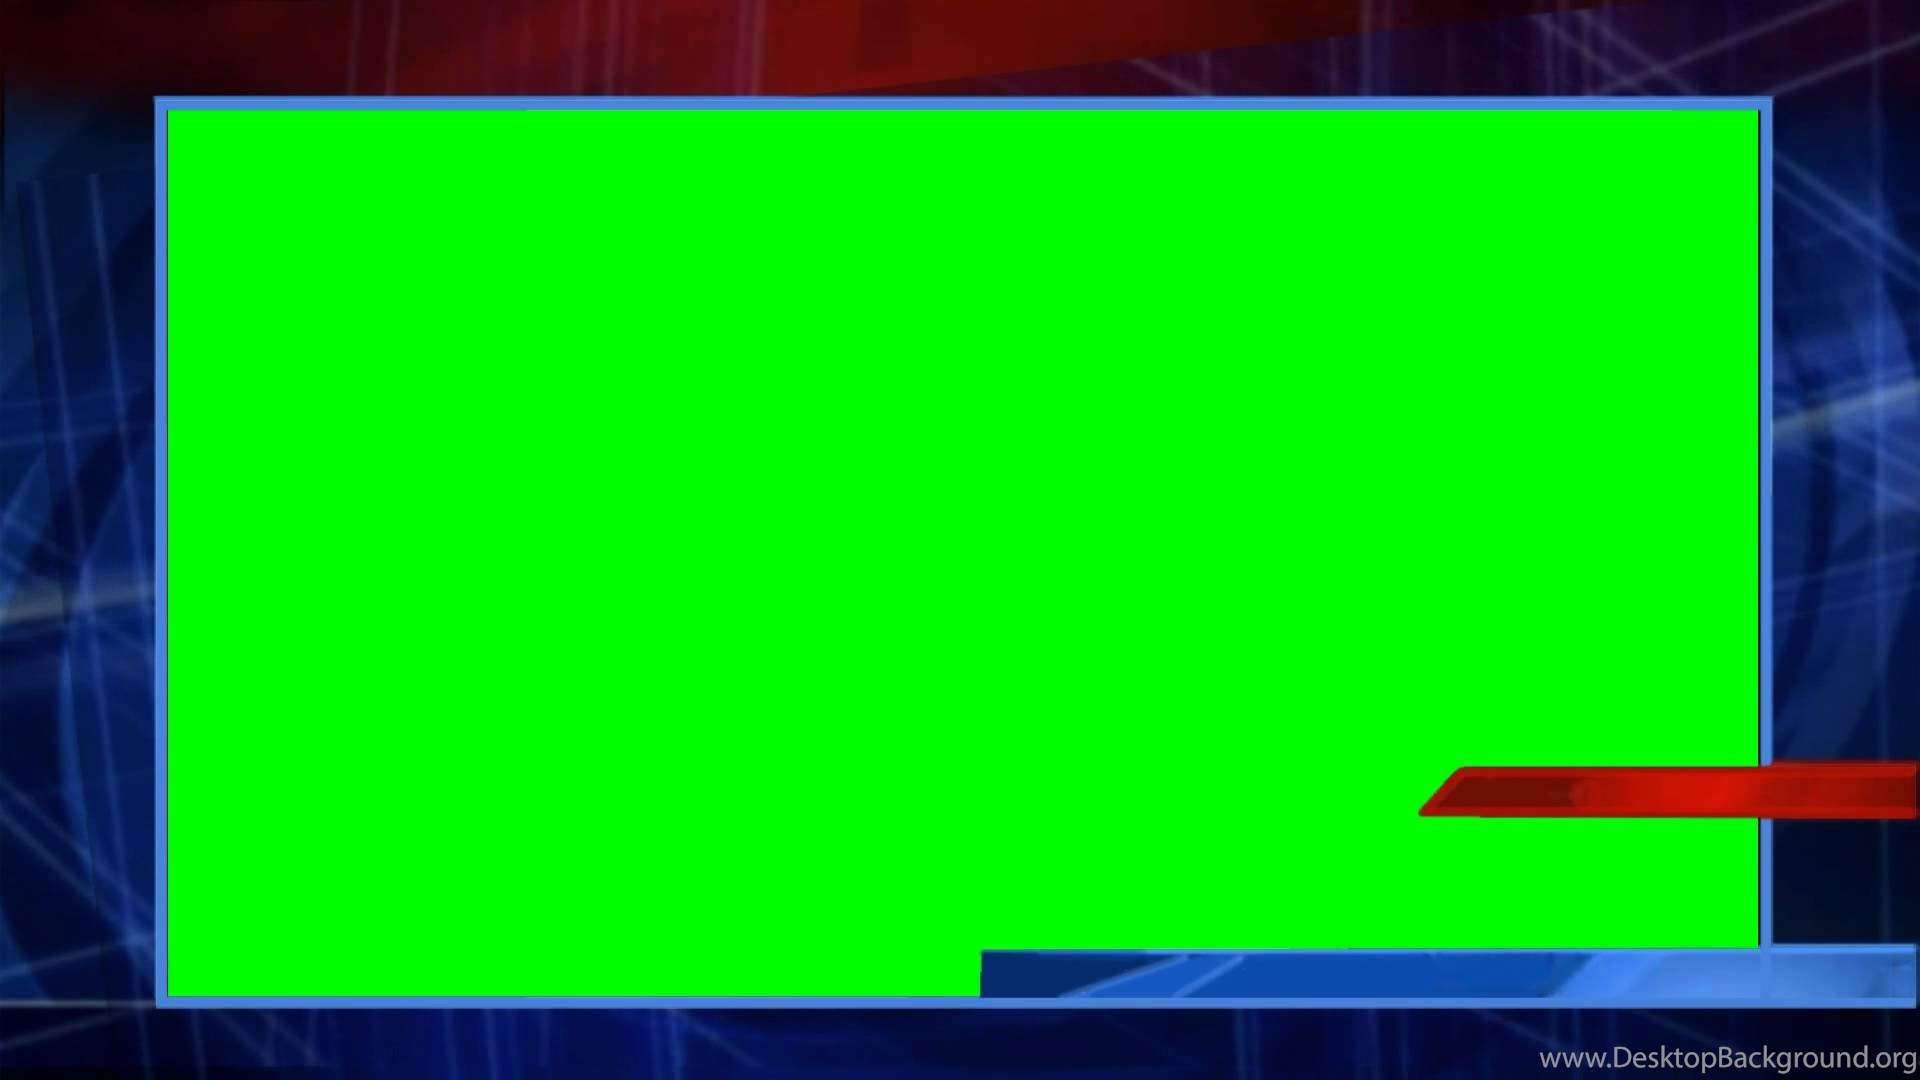 News Overlay Green Screen Free Backgrounds Video 1080p HD Stock